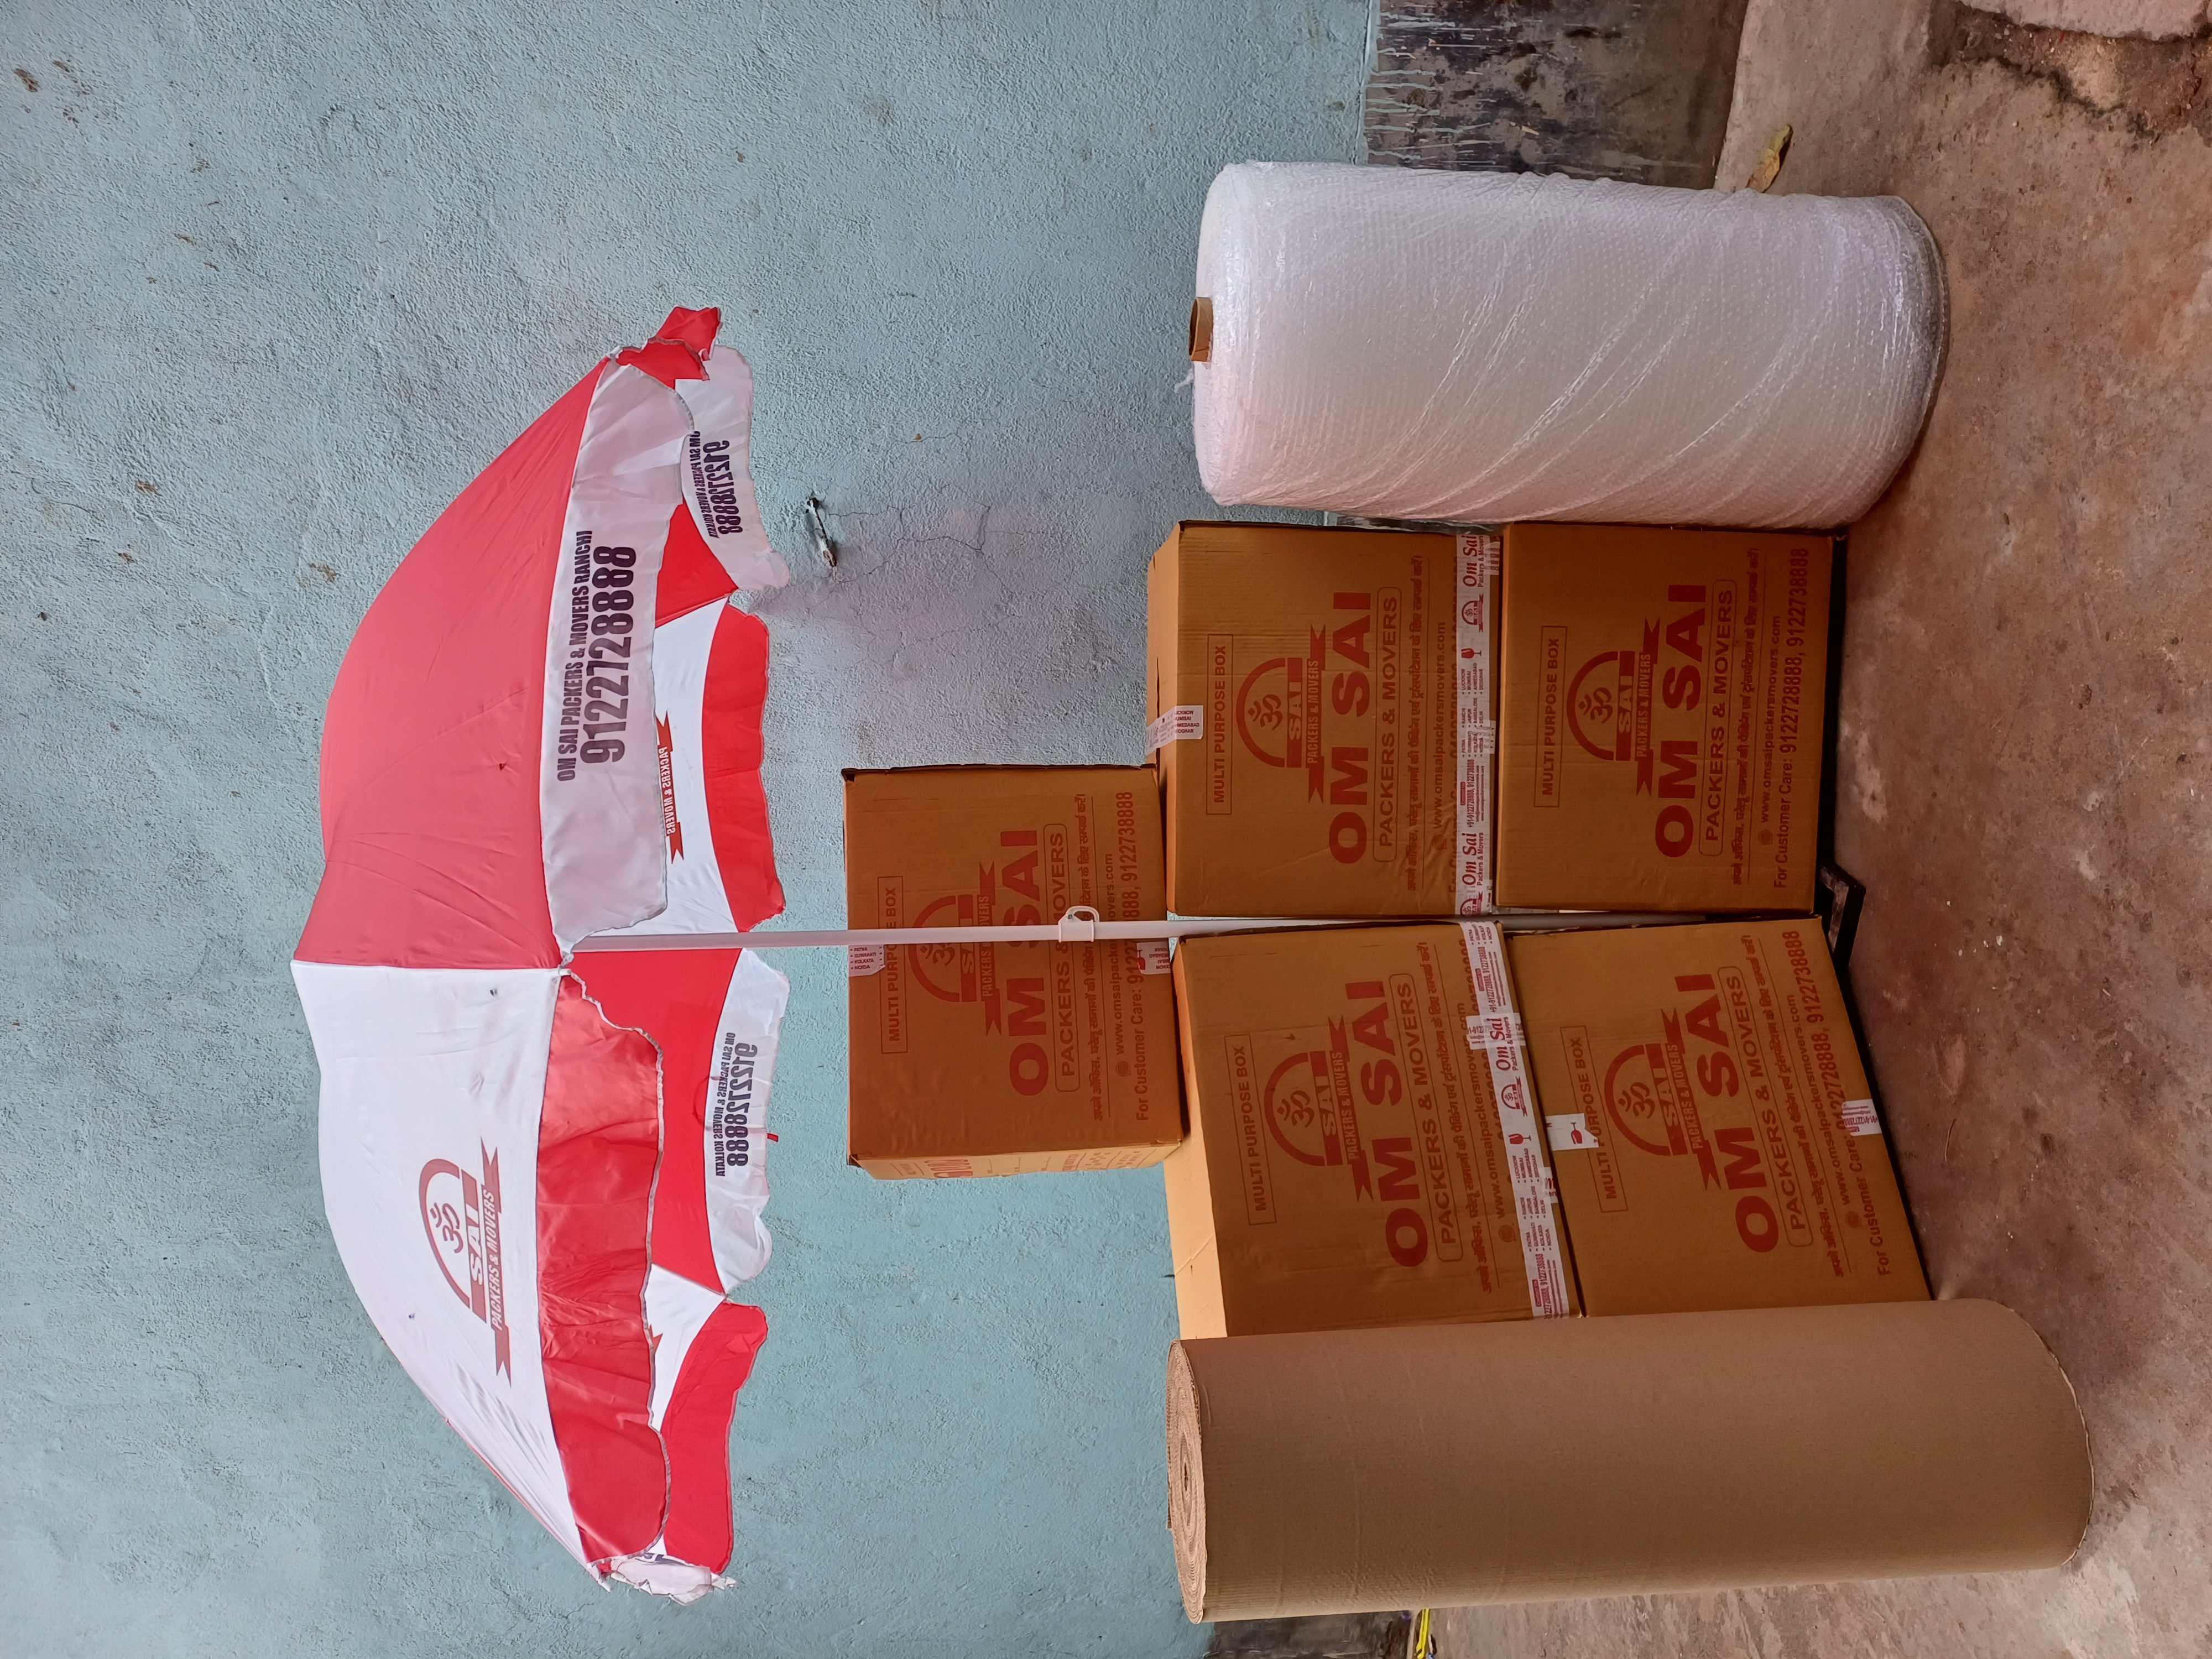 Packers and Movers in Durgapur branded material